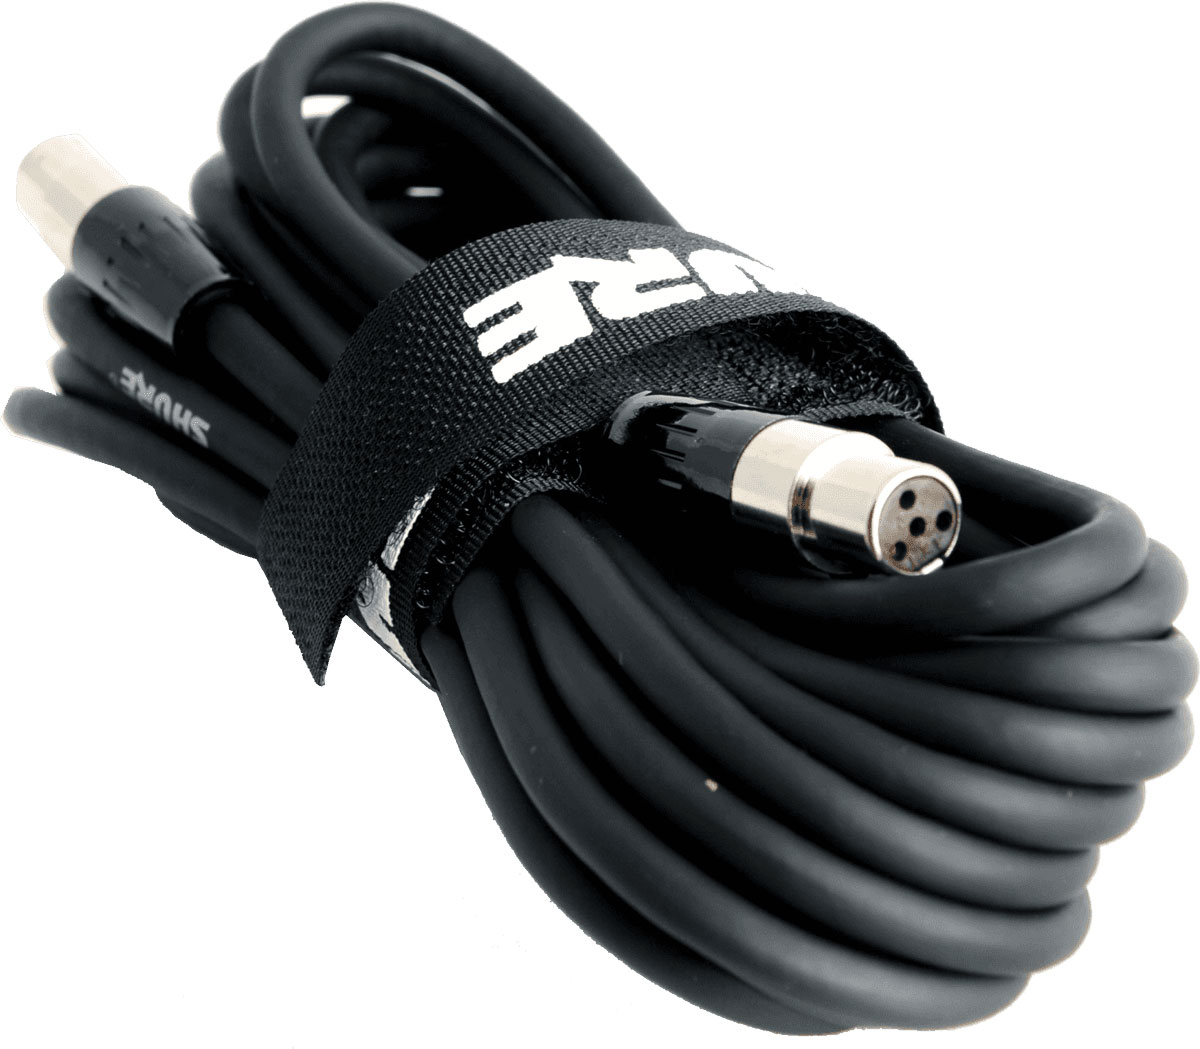 SHURE C98D REPLACEMENT CABLE FOR BETA 91 AND BETA 98 MICROPHONES